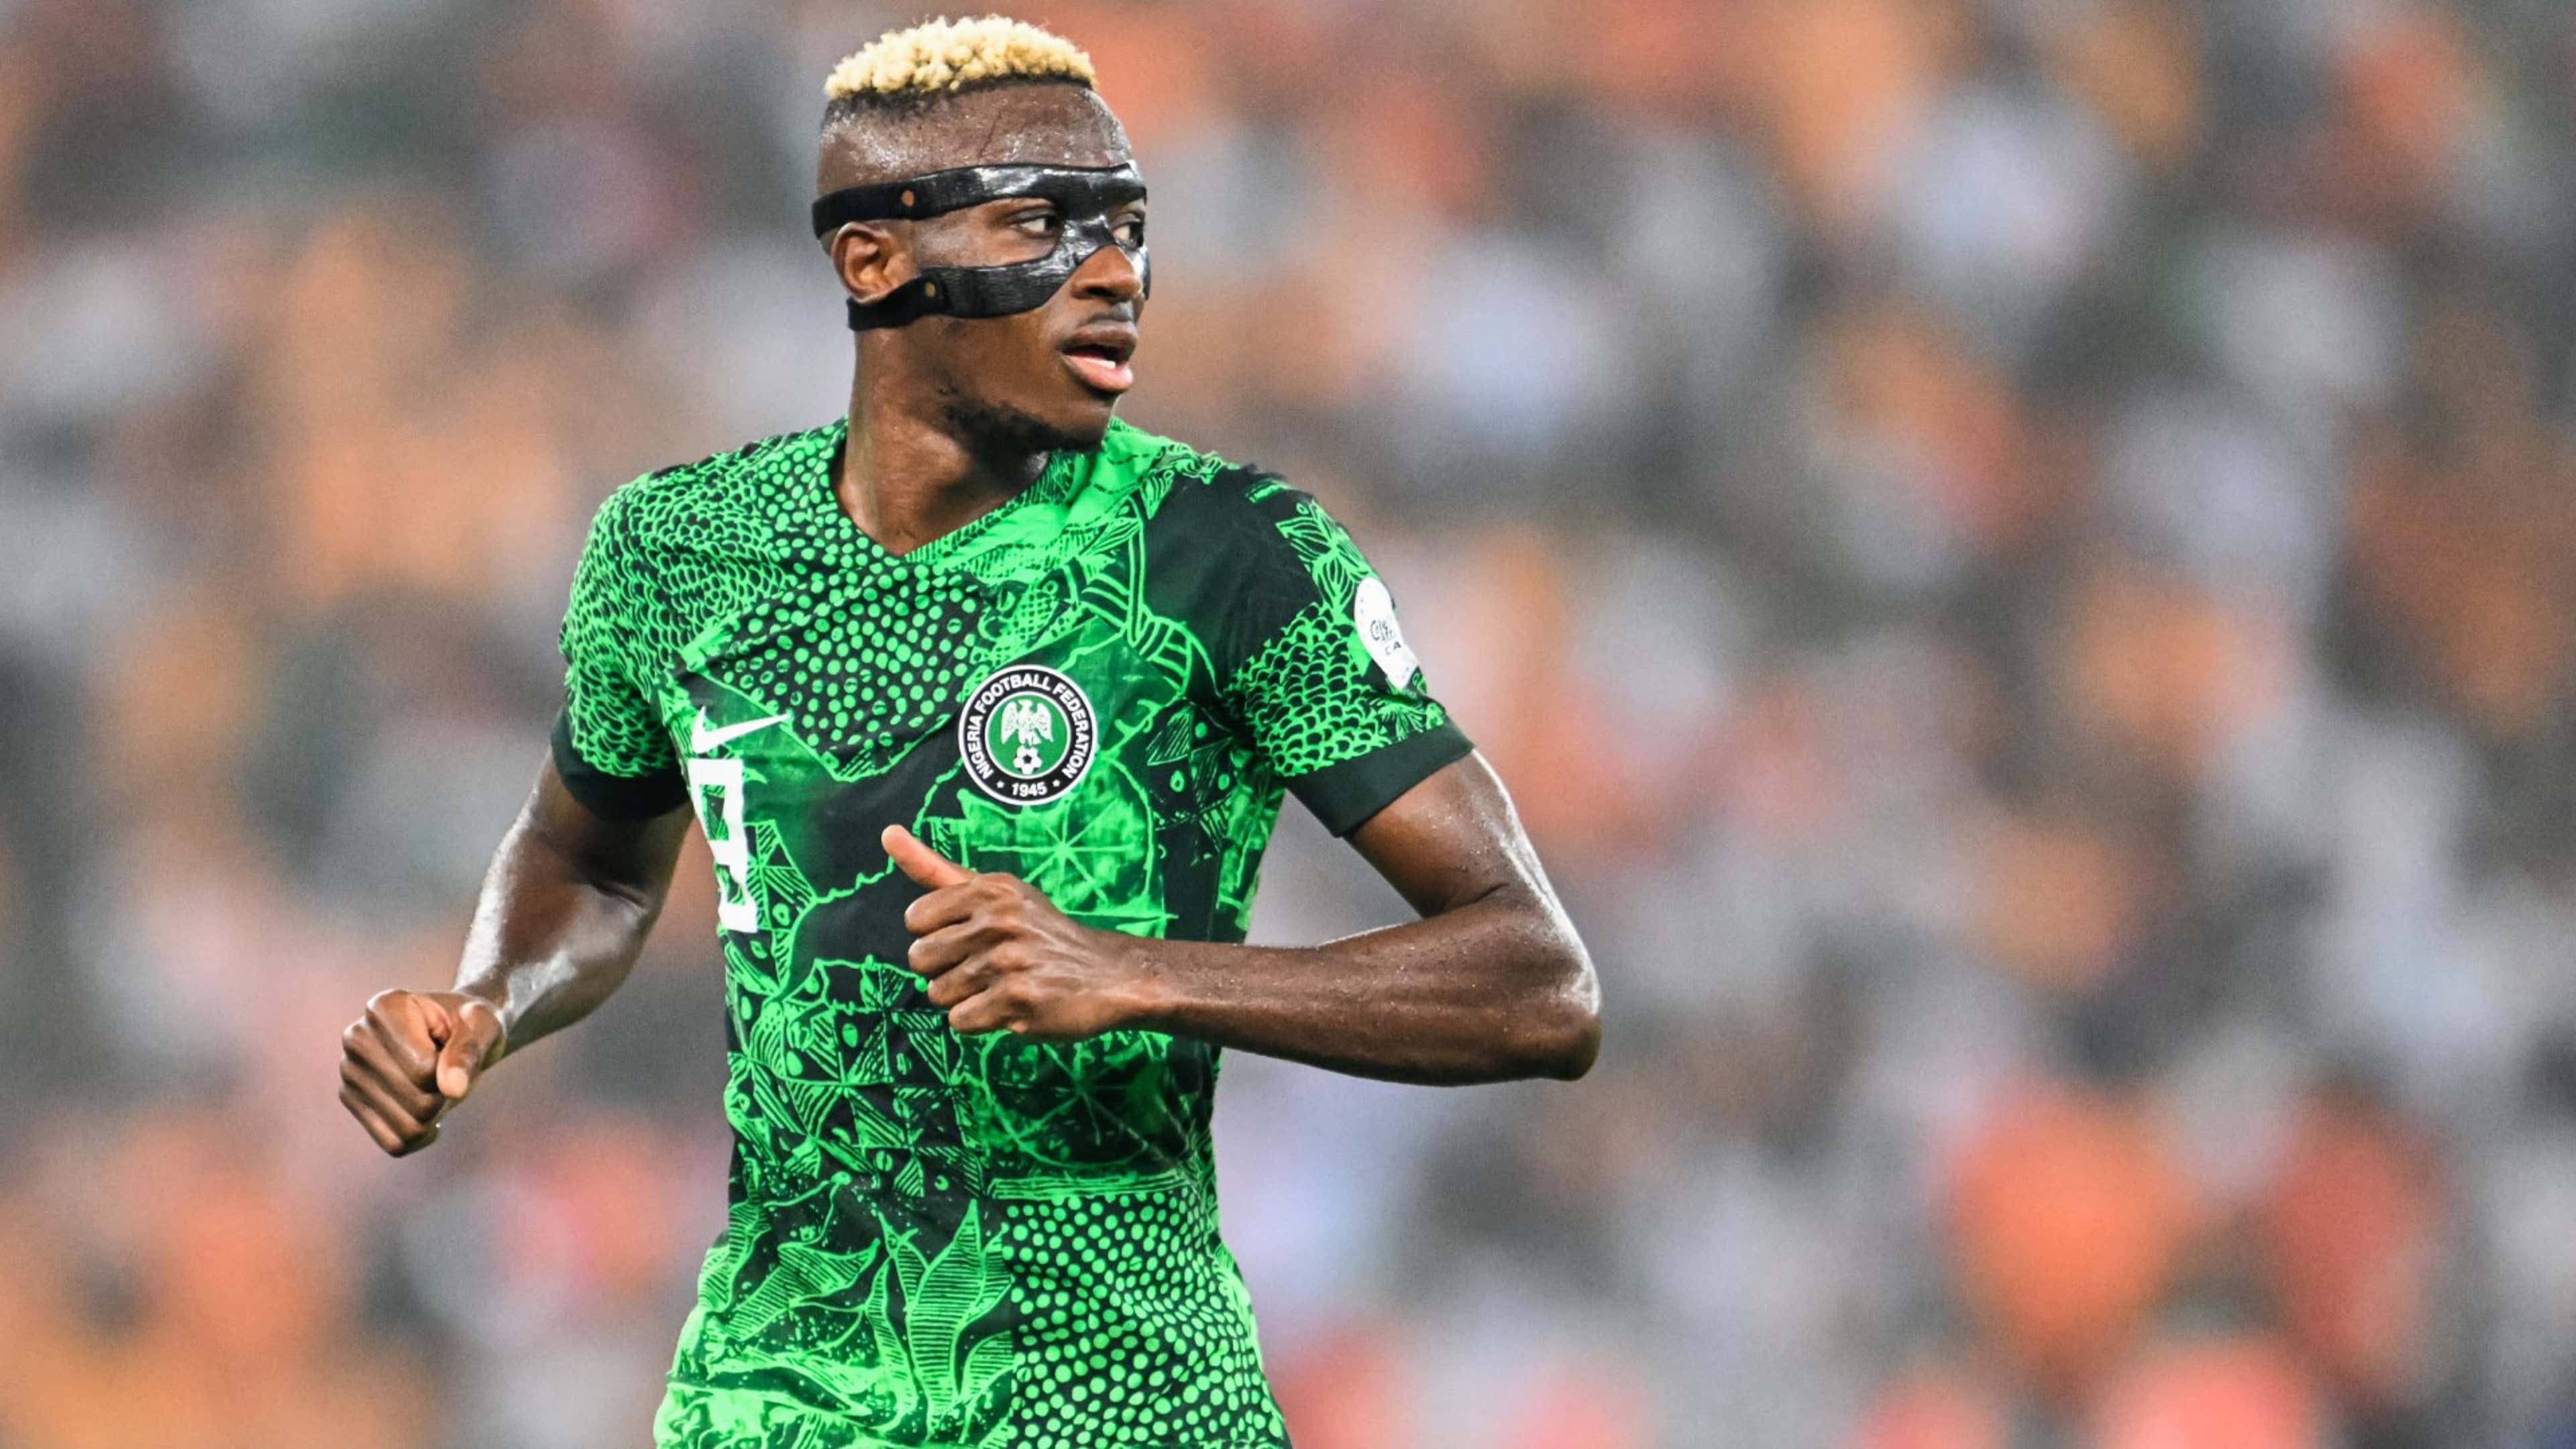 Embarrassing performance by Nigeria, I'm ashamed of them - Osimhen is not a  player but Batman! Ivory Coast deserve Afcon title' - Fans | Goal.com Kenya